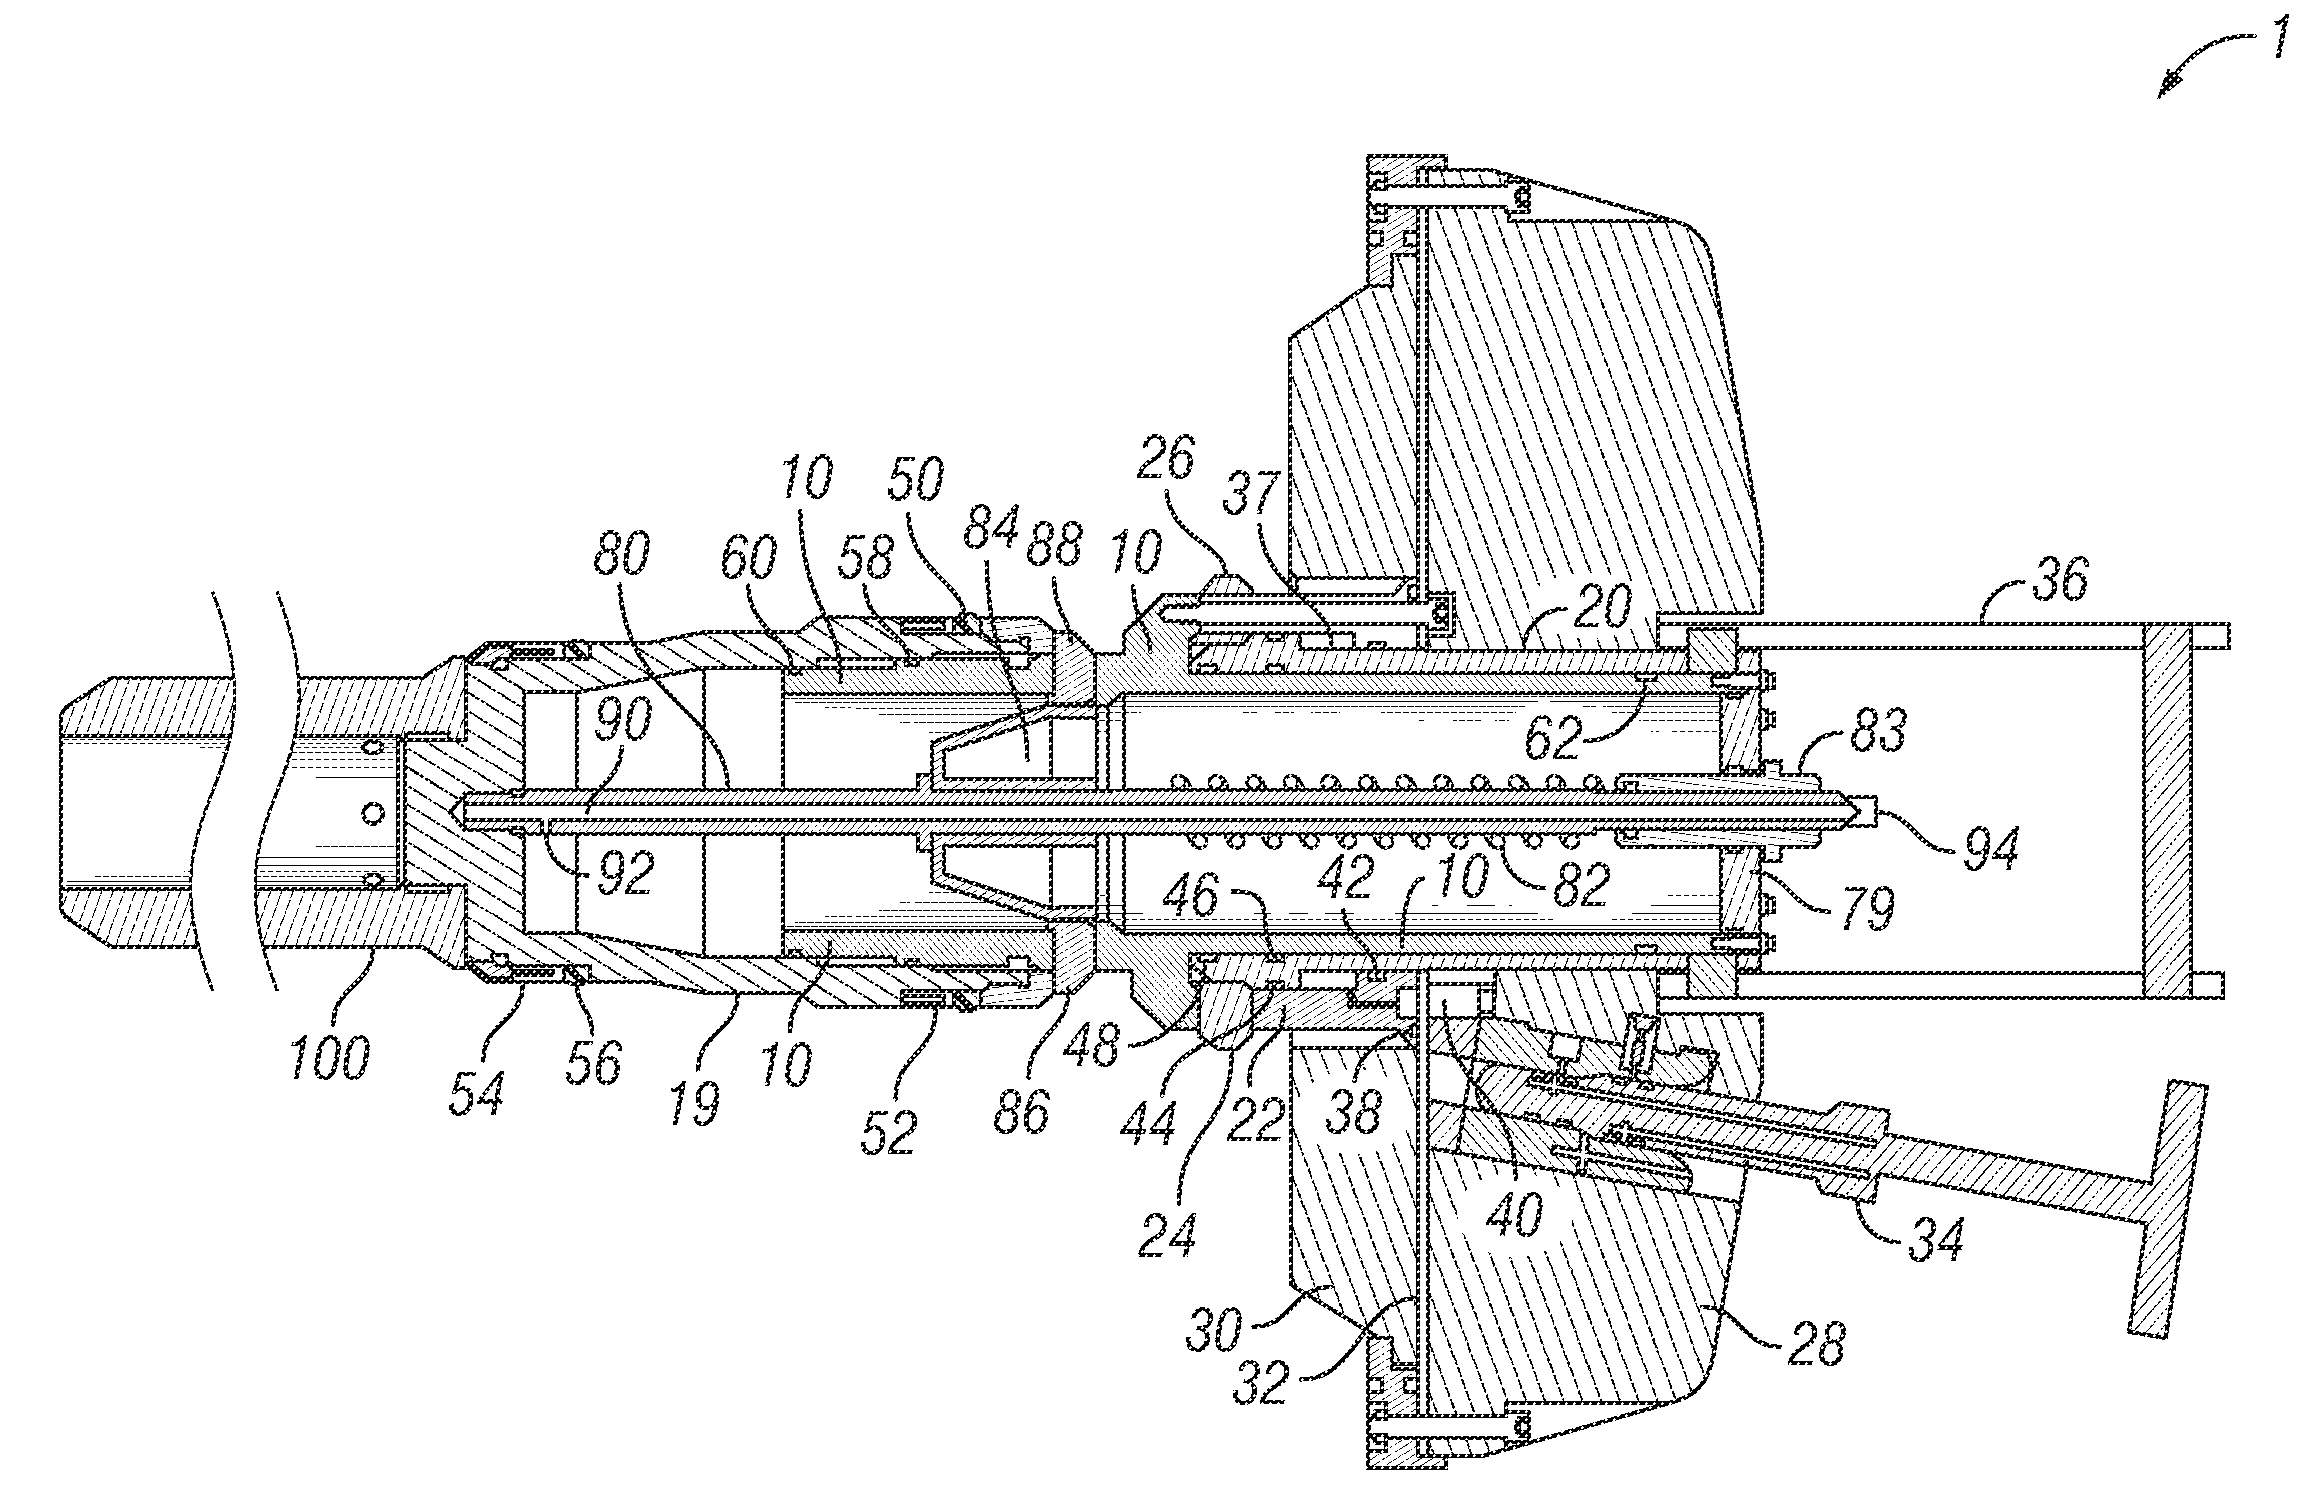 Subsea tree cap and method for installing the subsea tree cap